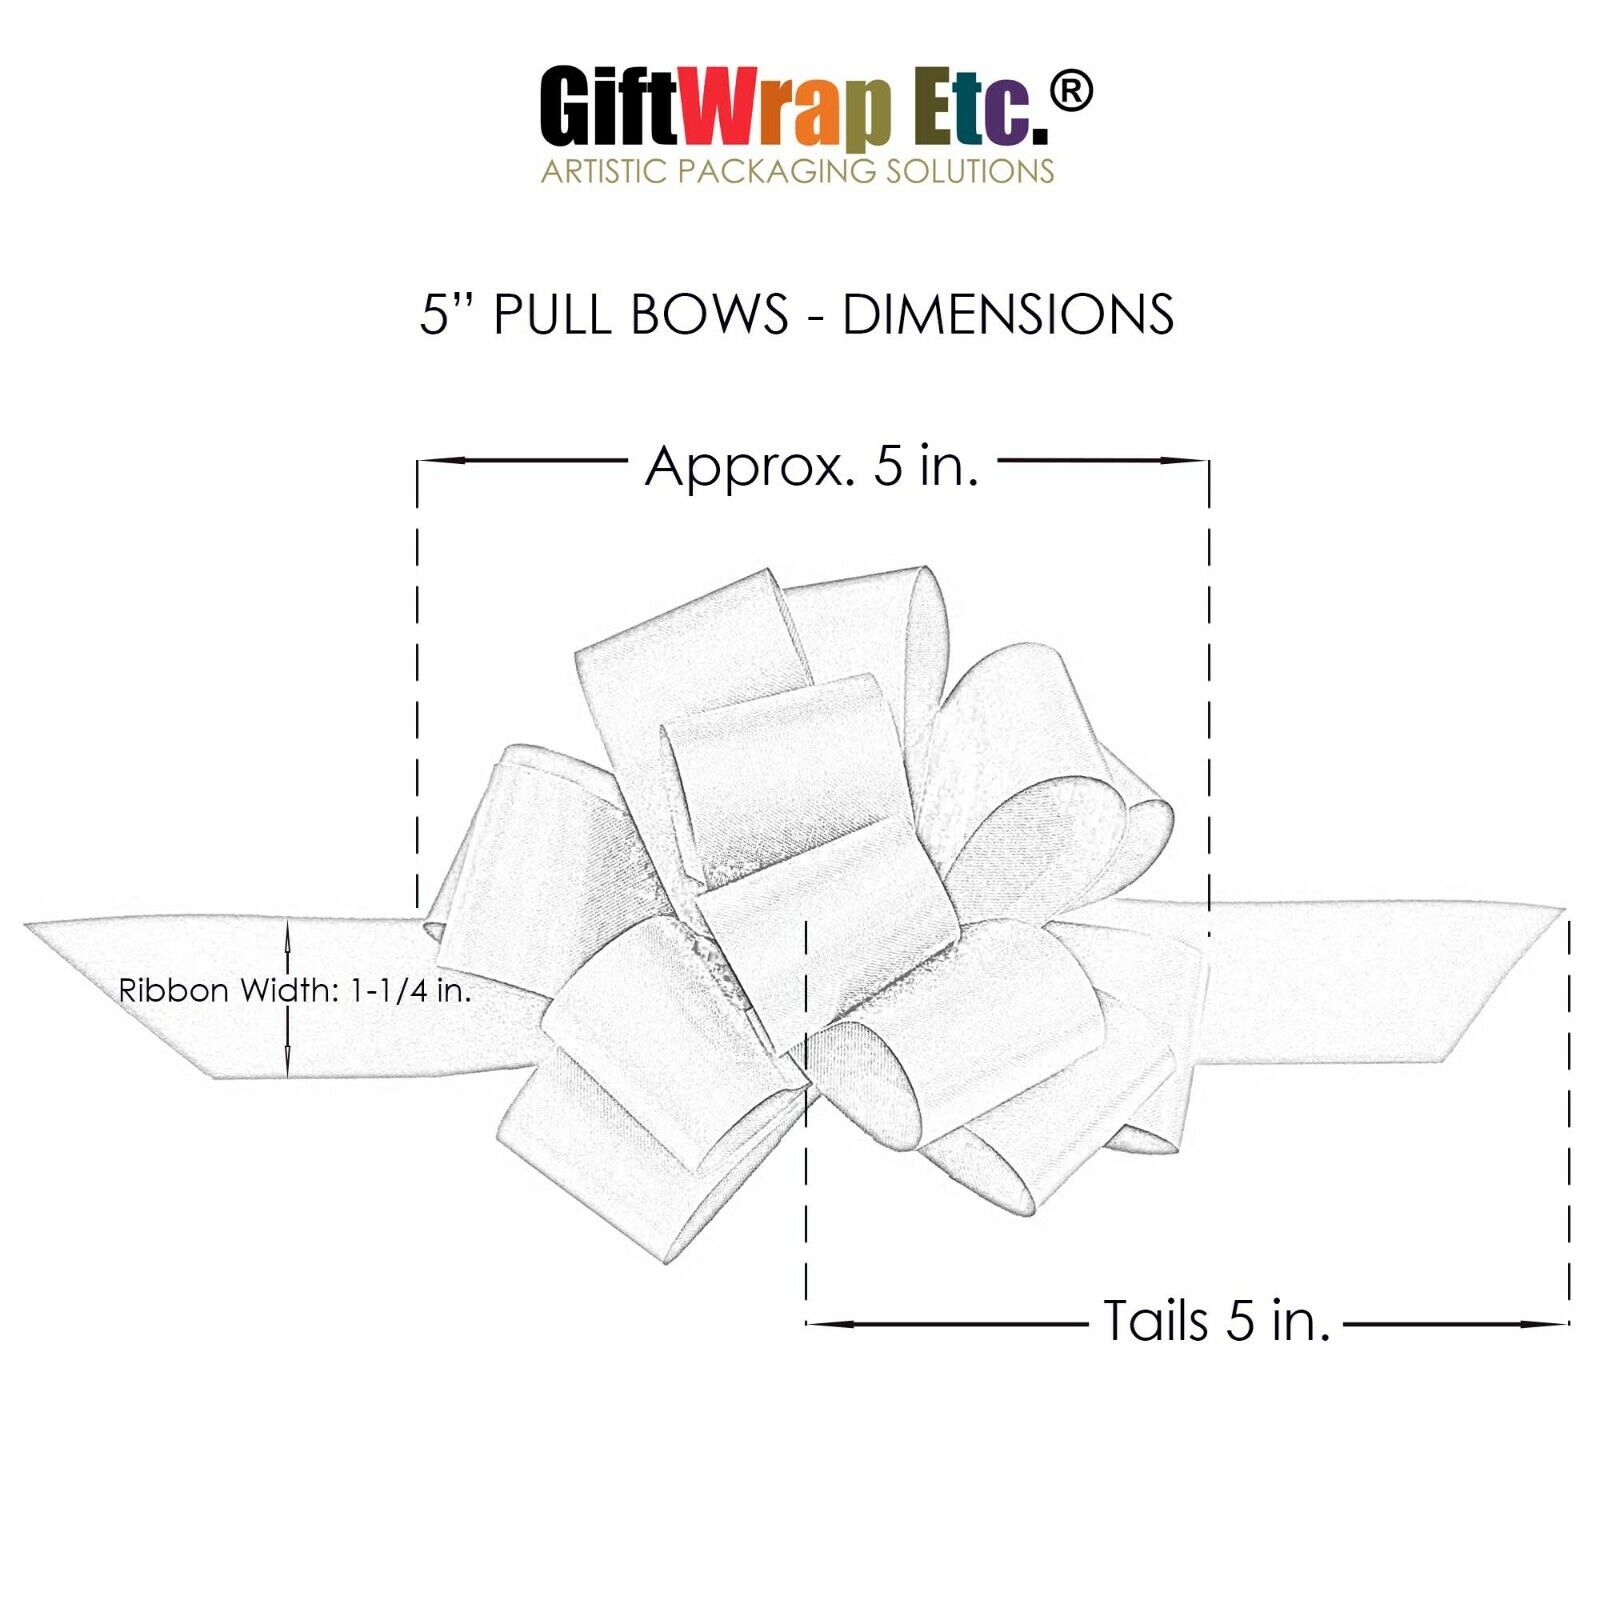 Christmas Gift Pull Bows - 5" Wide, Set of 9, Red, Green, Gold, Stripes, Swirls  GiftWrap Etc 51 - фотография #12